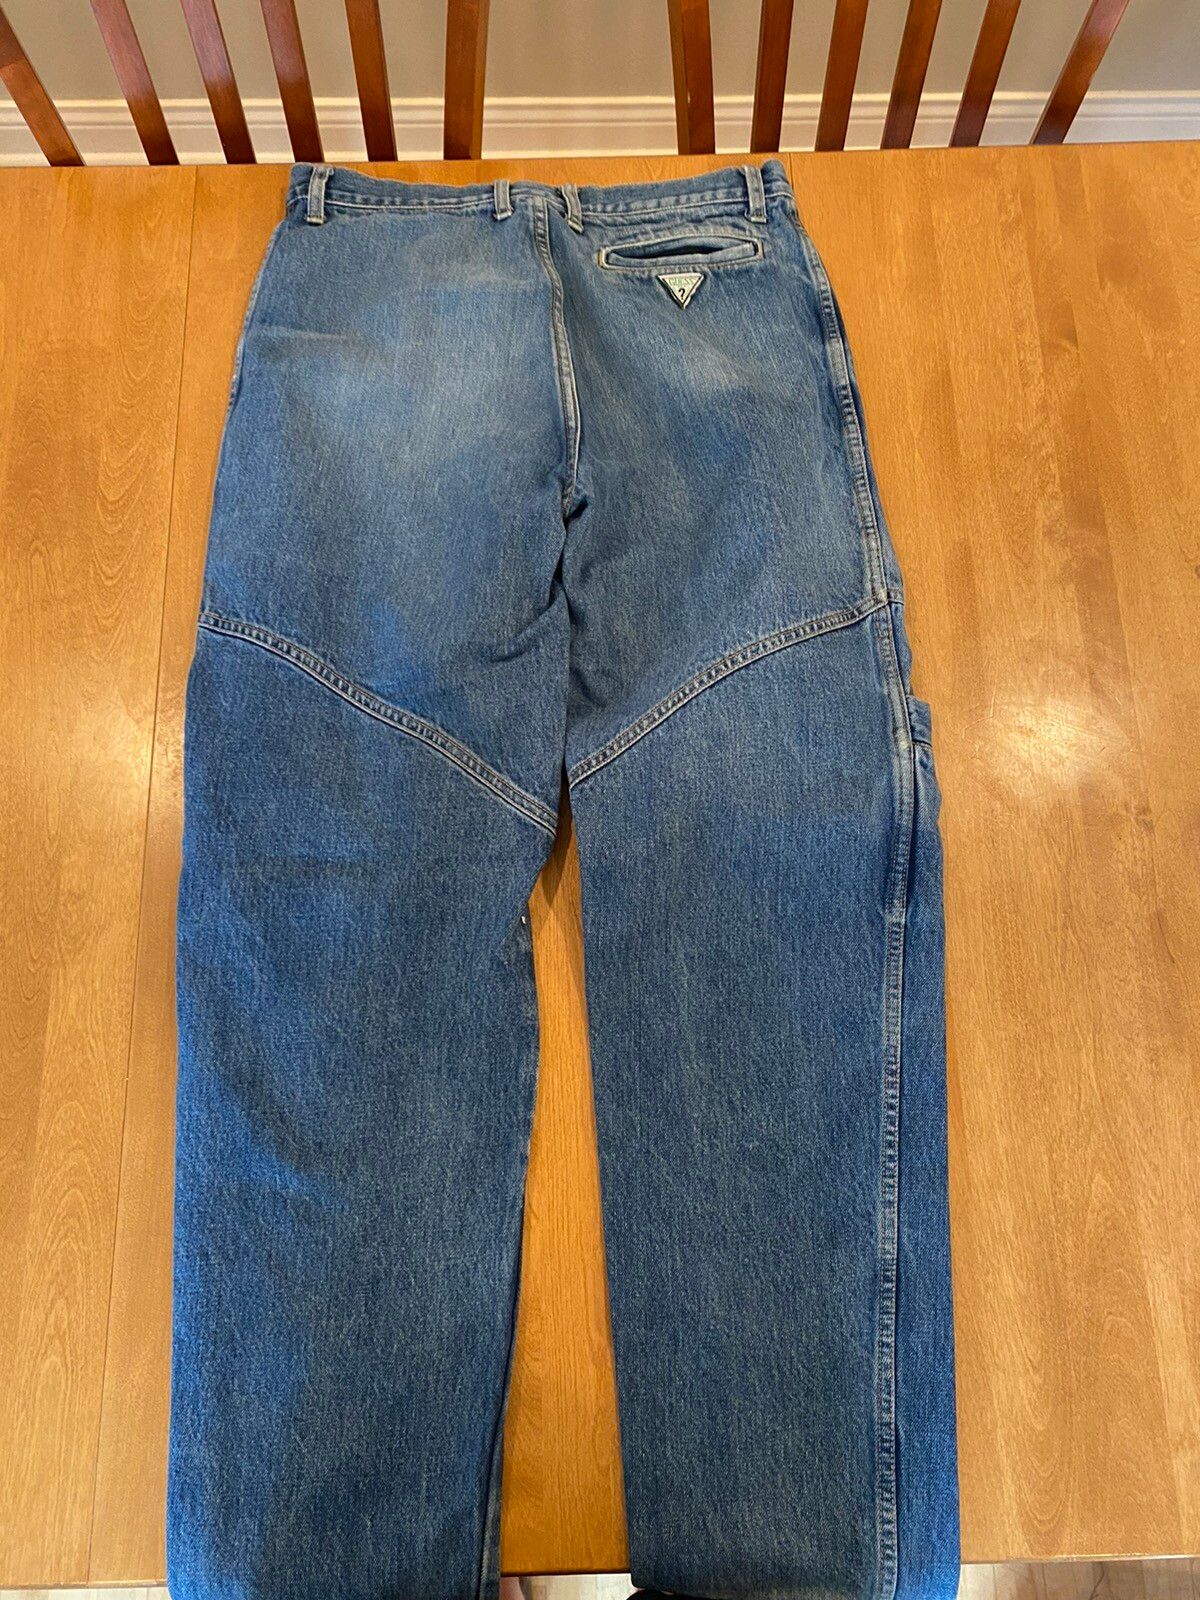 Guess Georges Marciano for guess denim Size US 36 / EU 52 - 2 Preview